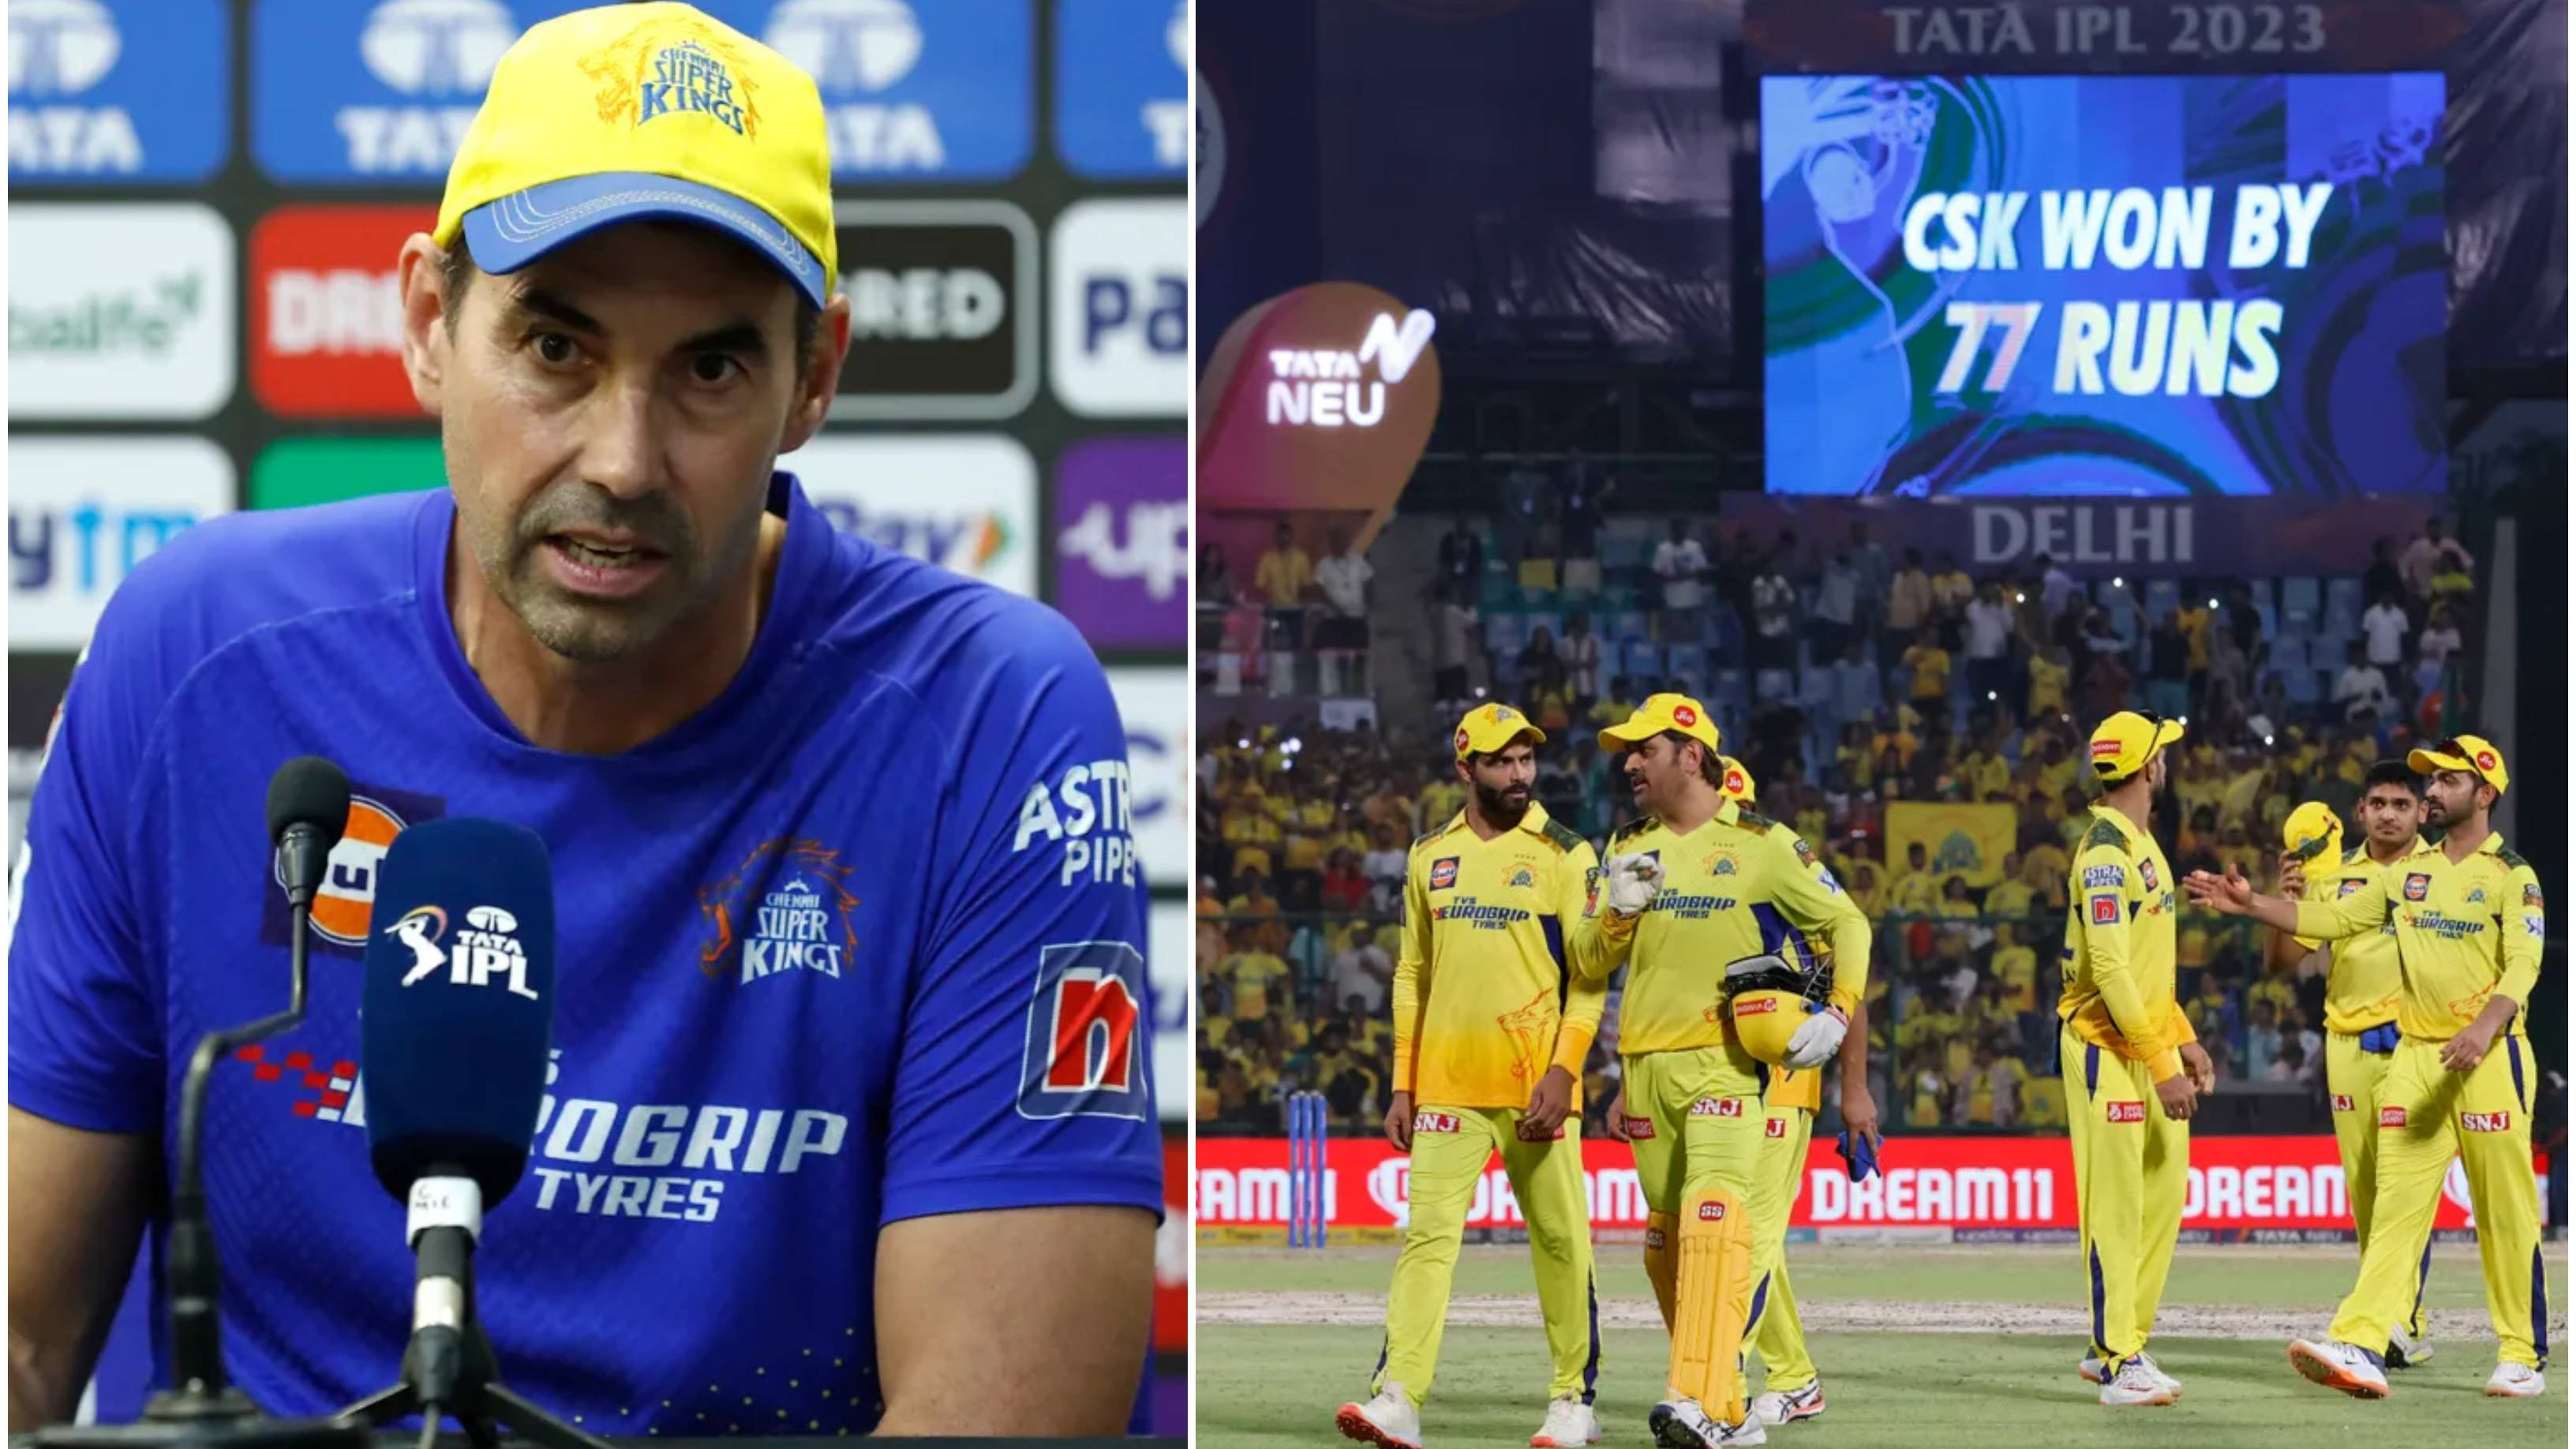 IPL 2023: CSK “not sure” of Chepauk conditions, says Stephen Fleming ahead of qualifiers at home